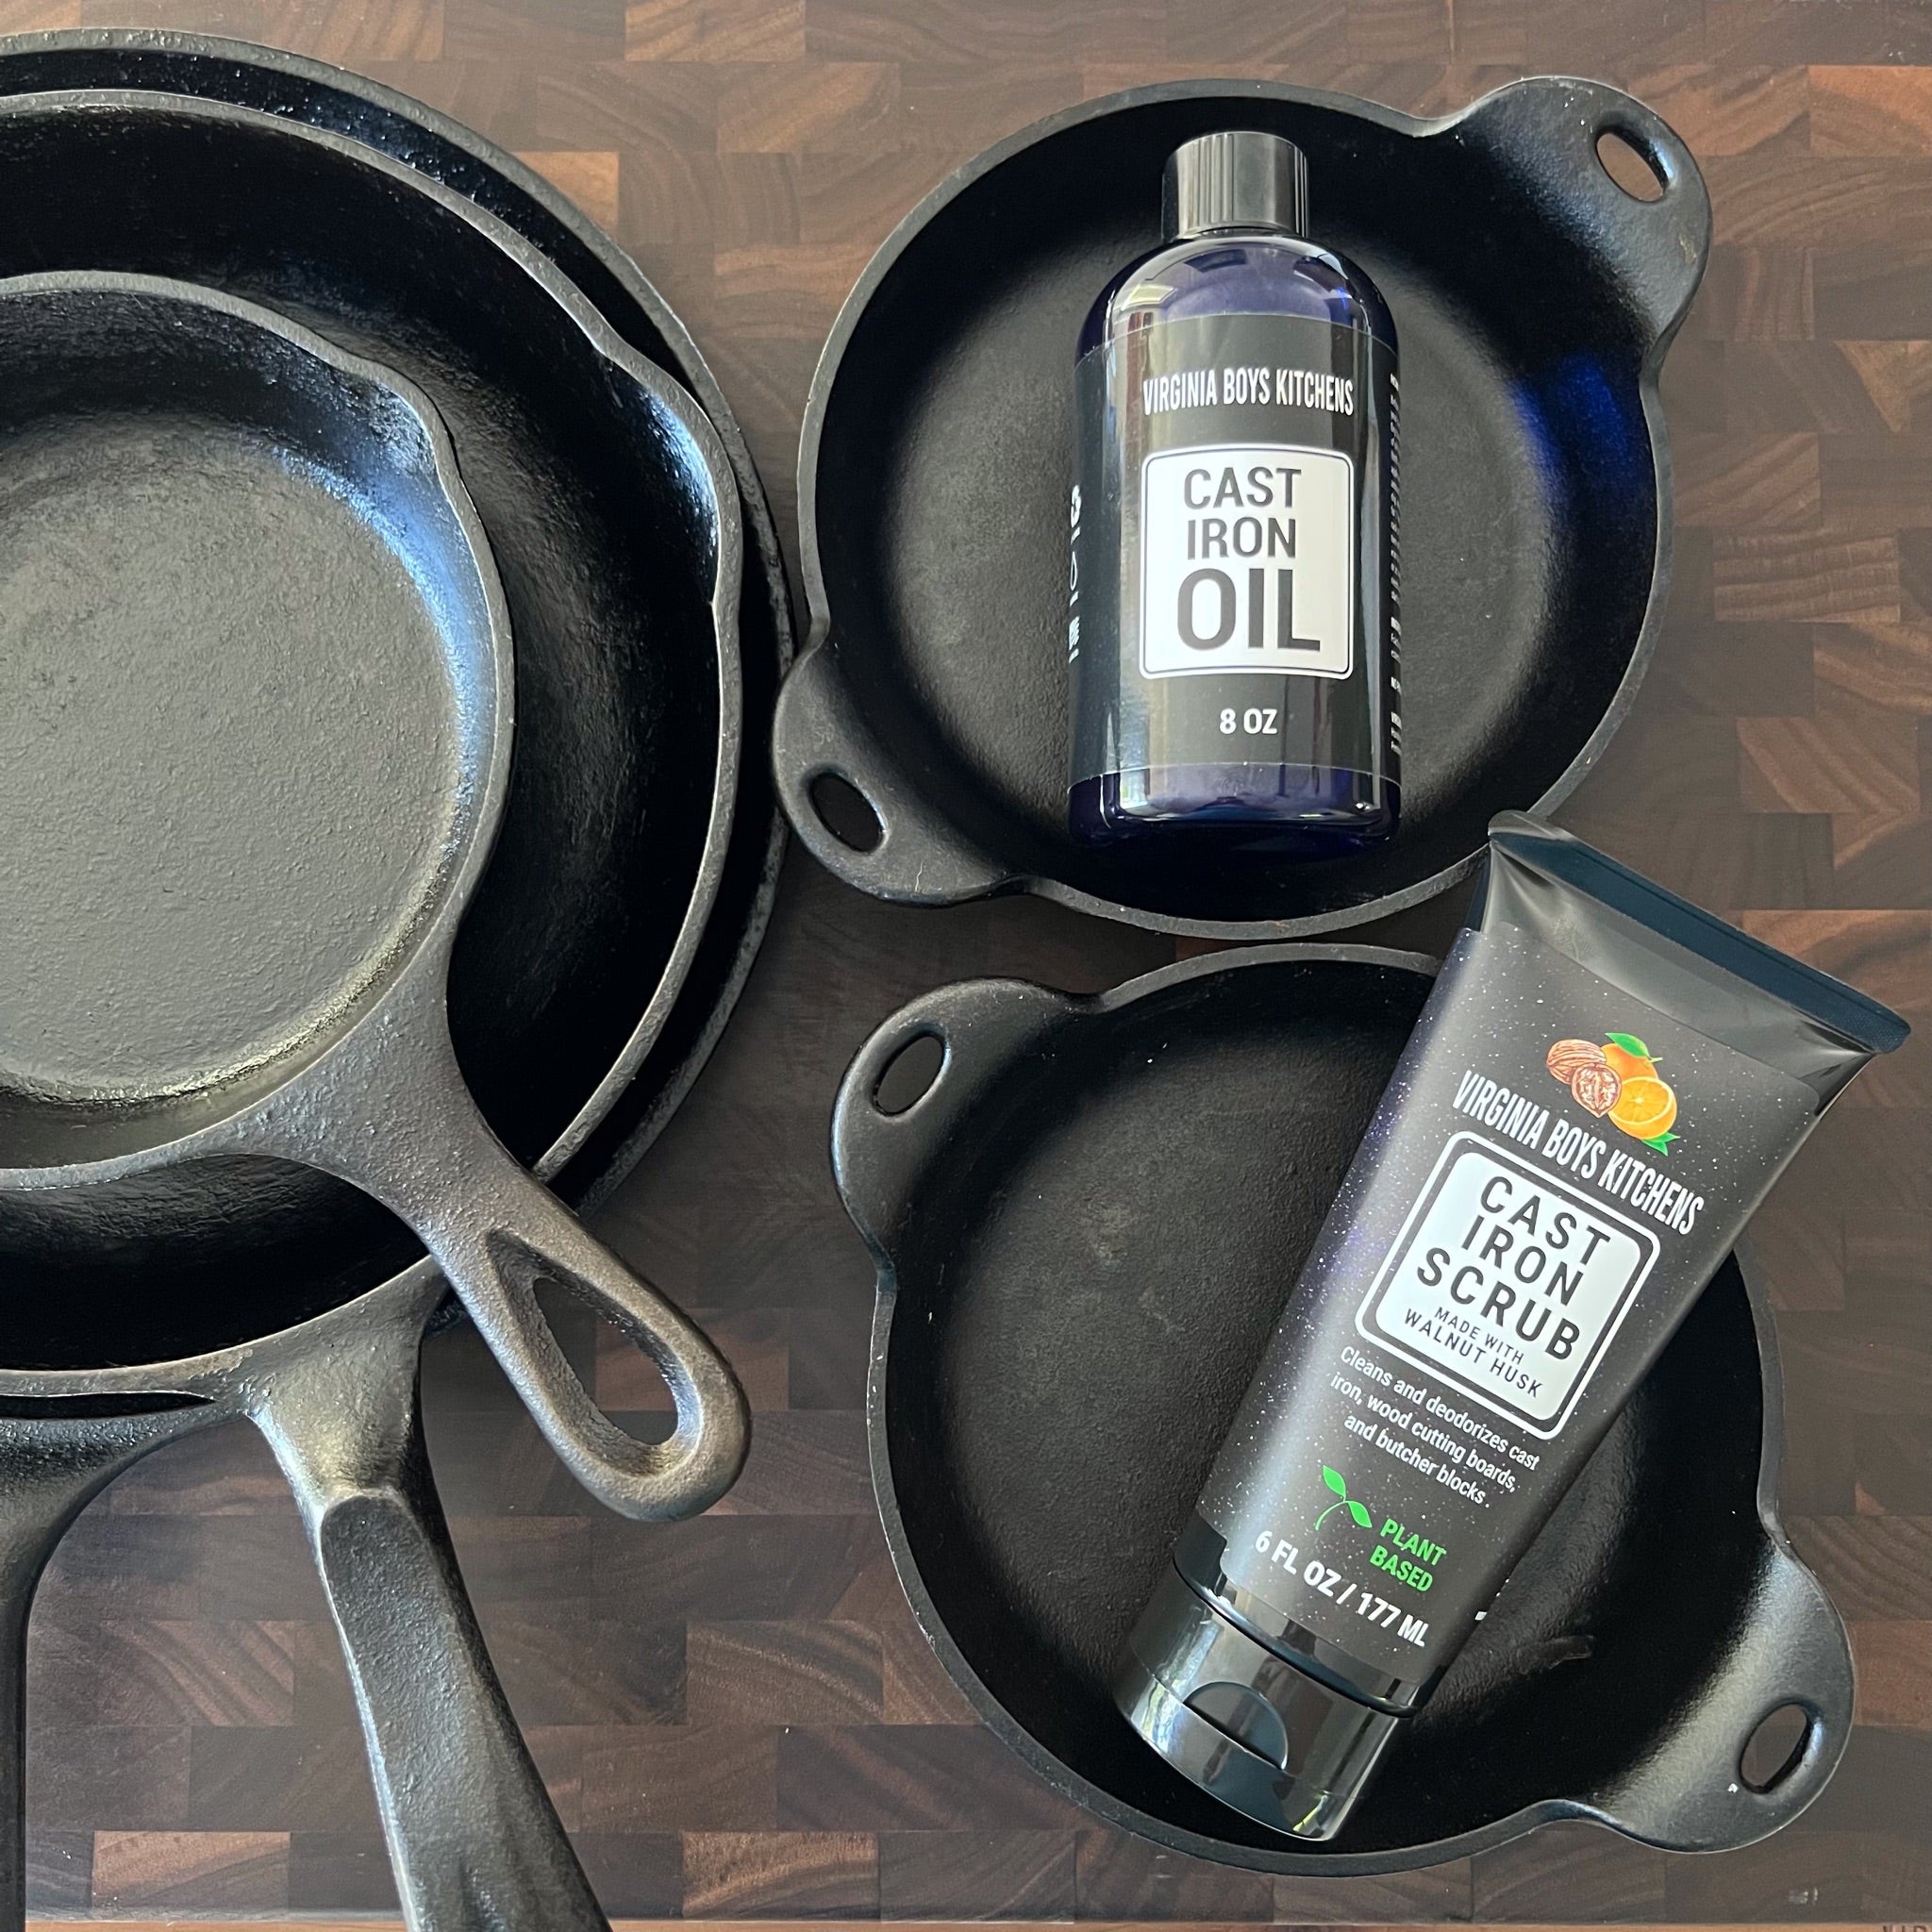 How to Season Iron Cookware with Butter? - Virginia Boys Kitchens